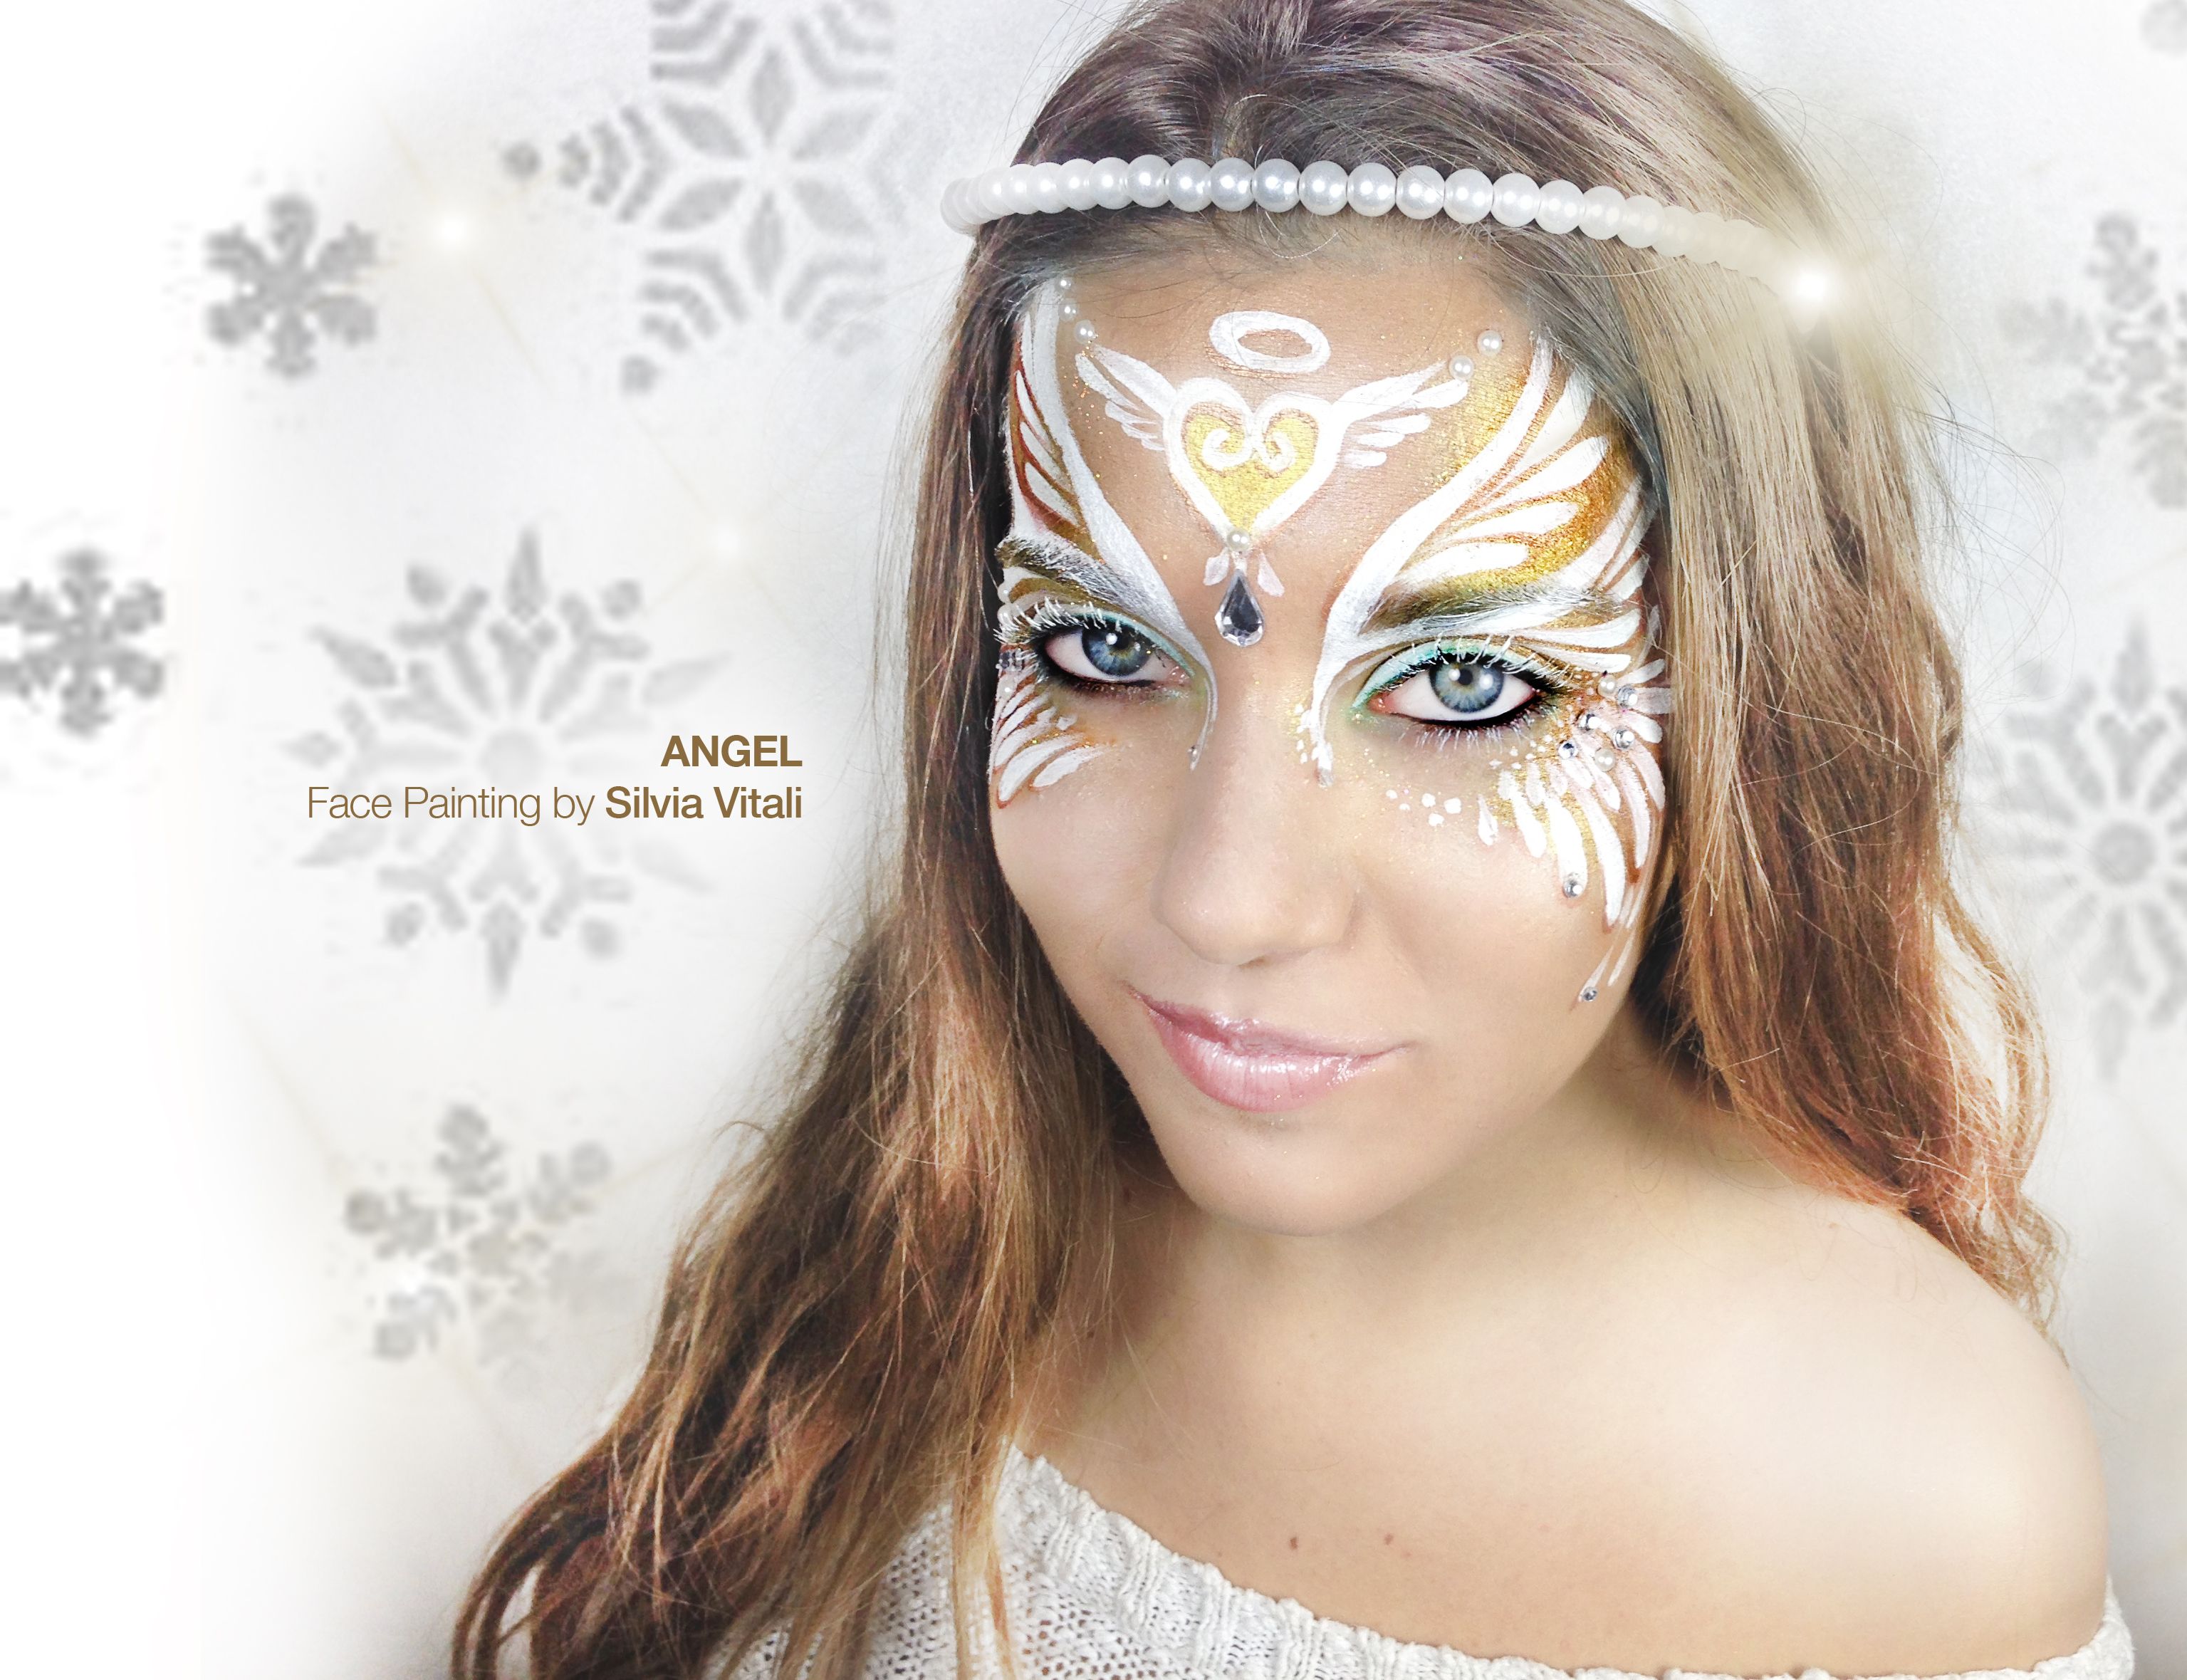 ANGEL Face Painting by Silvia Vitali https://www.facepainting ...